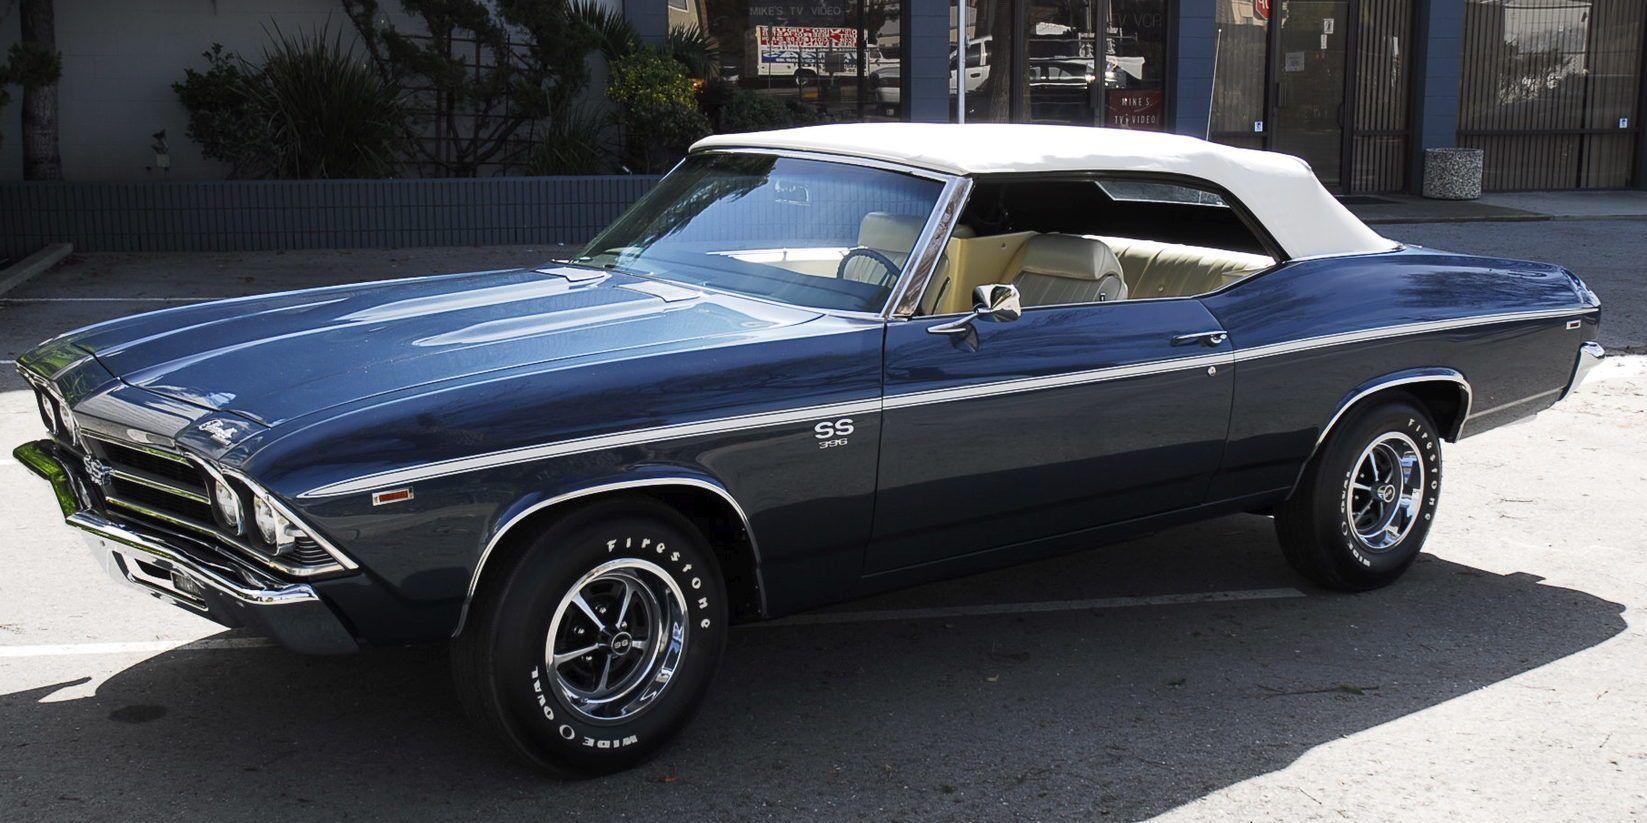 Paul Walker's Chevy Chevelle SS Soft Top